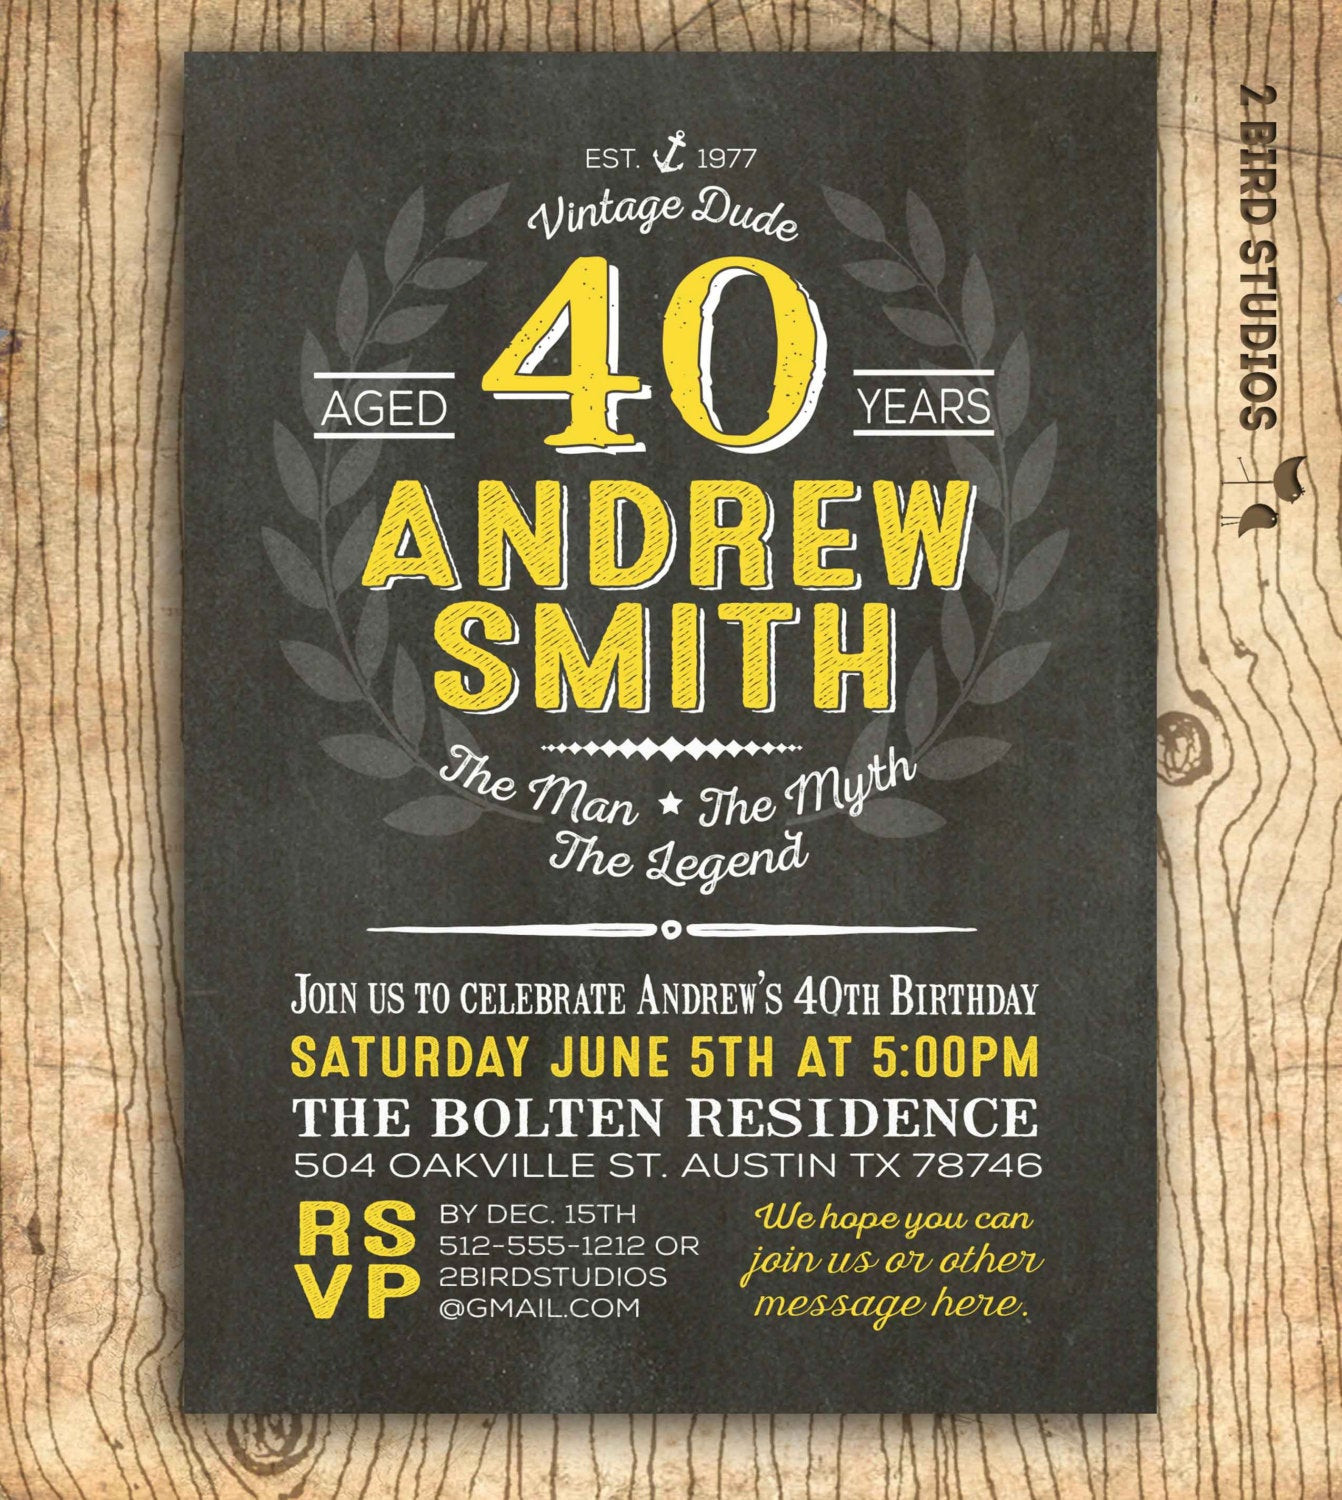 The Best 40th Birthday Party Invitations – Home, Family, Style and Art Ideas